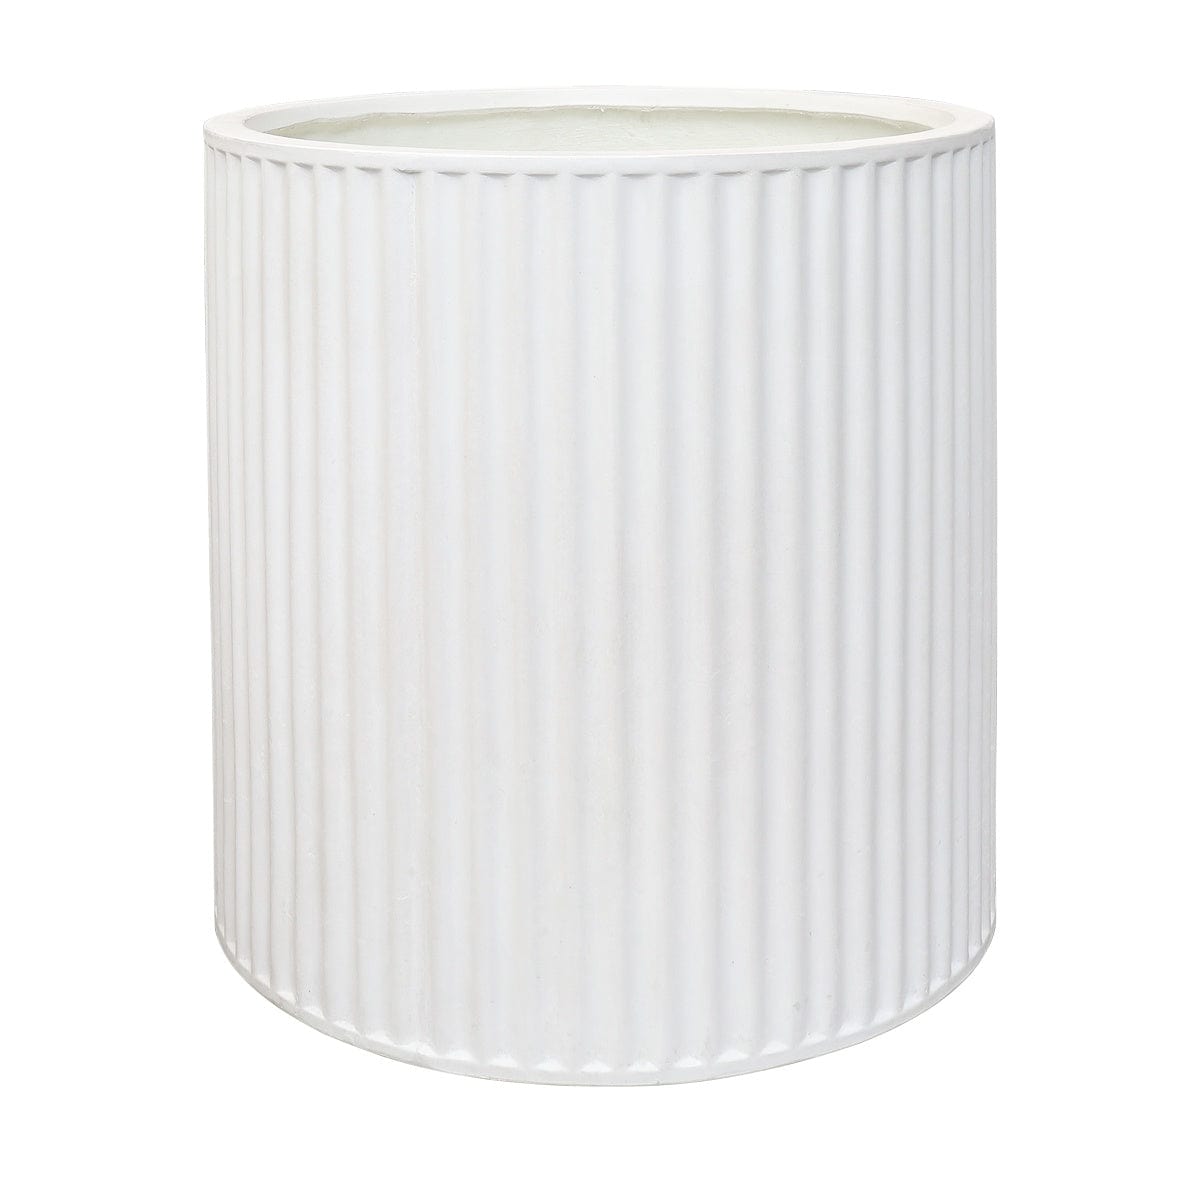 Piako Ribbed Cylinder Planter Large - White PRE ORDER Little & Fox